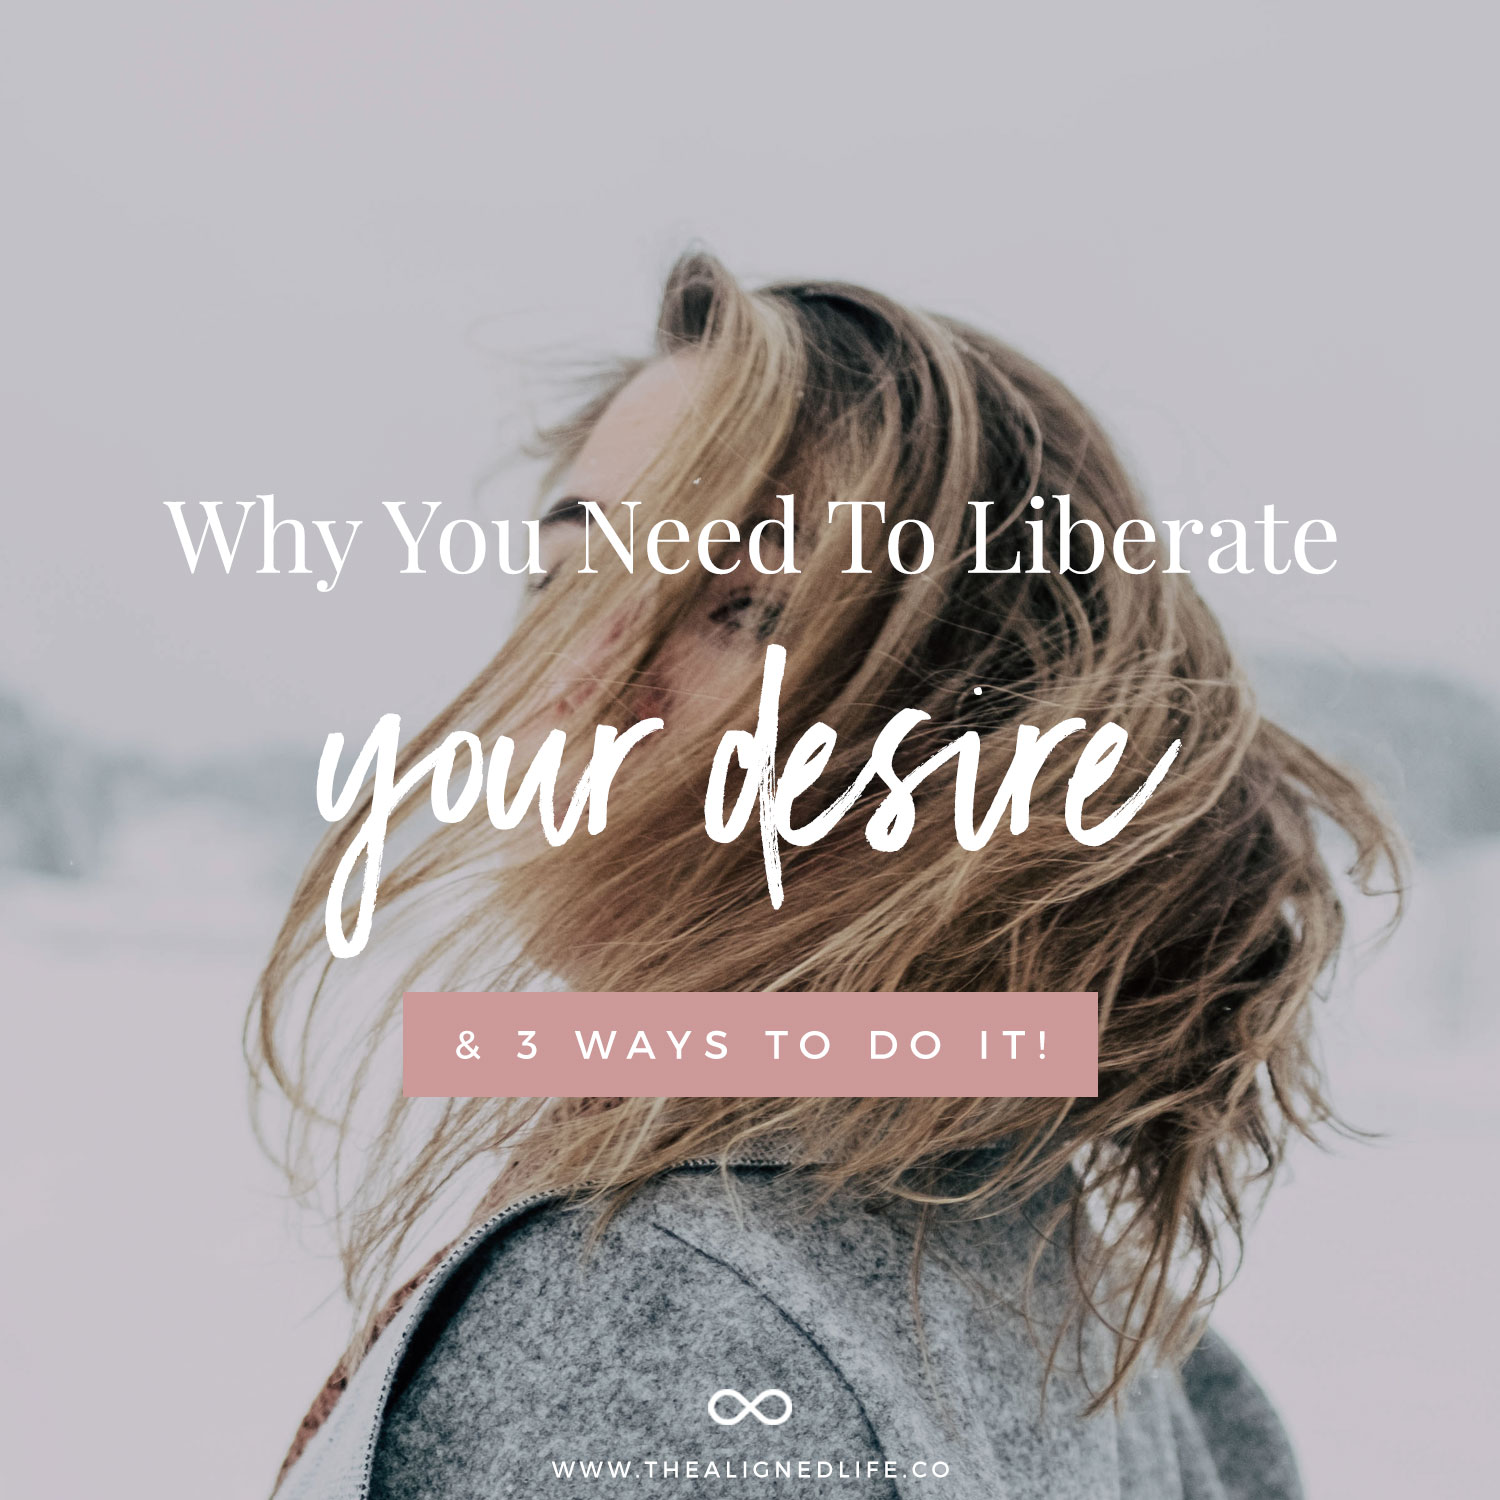 Why You Need To Liberate Your Desire ( & 3 Ways To Do It!)